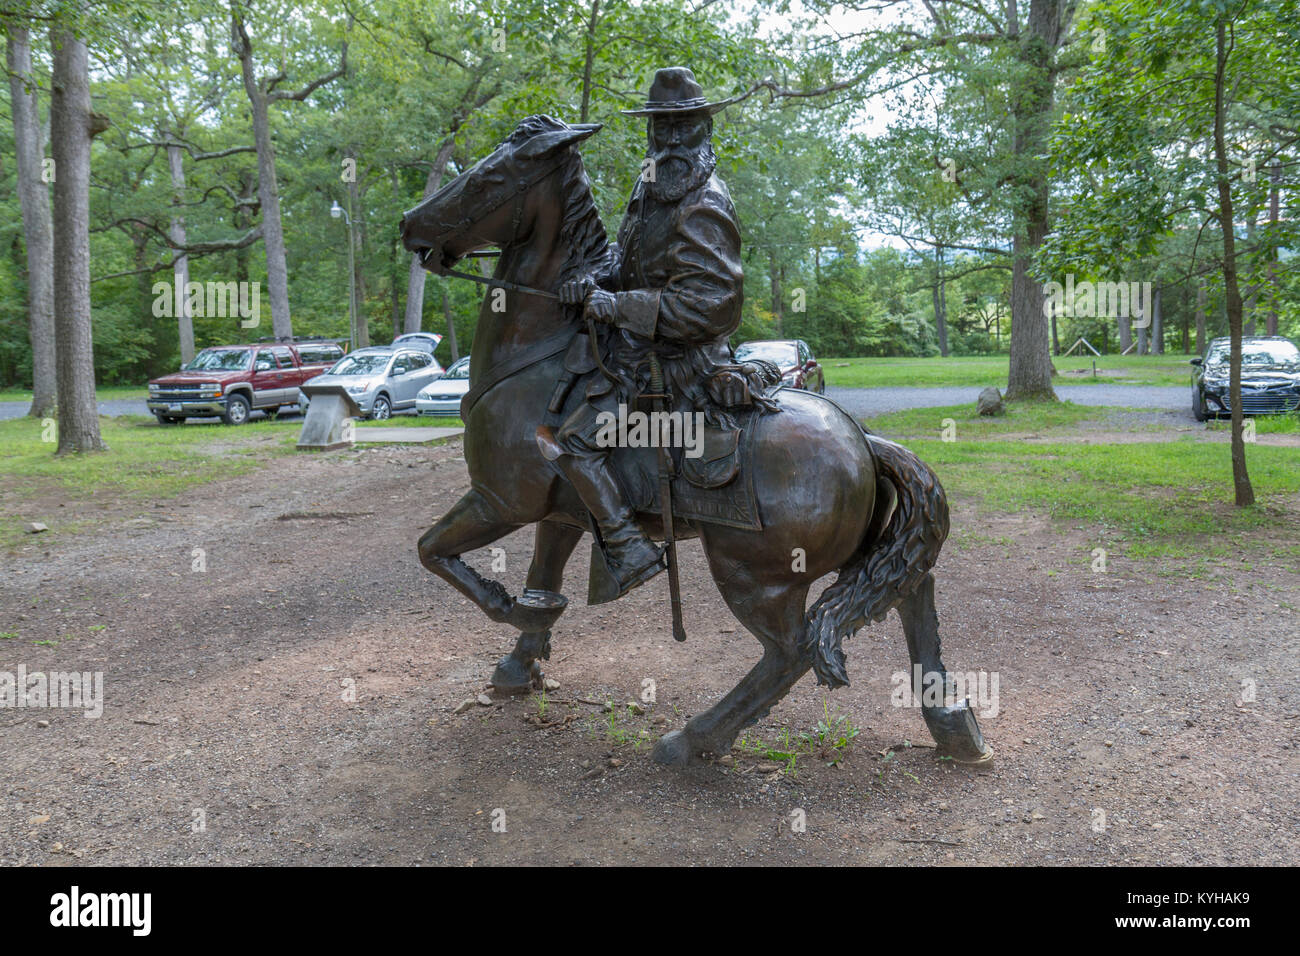 Equestrian statue of Confederate General James Longstreet on Hero in Pitzer Woods, Gettysburg National Military Park, Pennsylvania, United States. Stock Photo